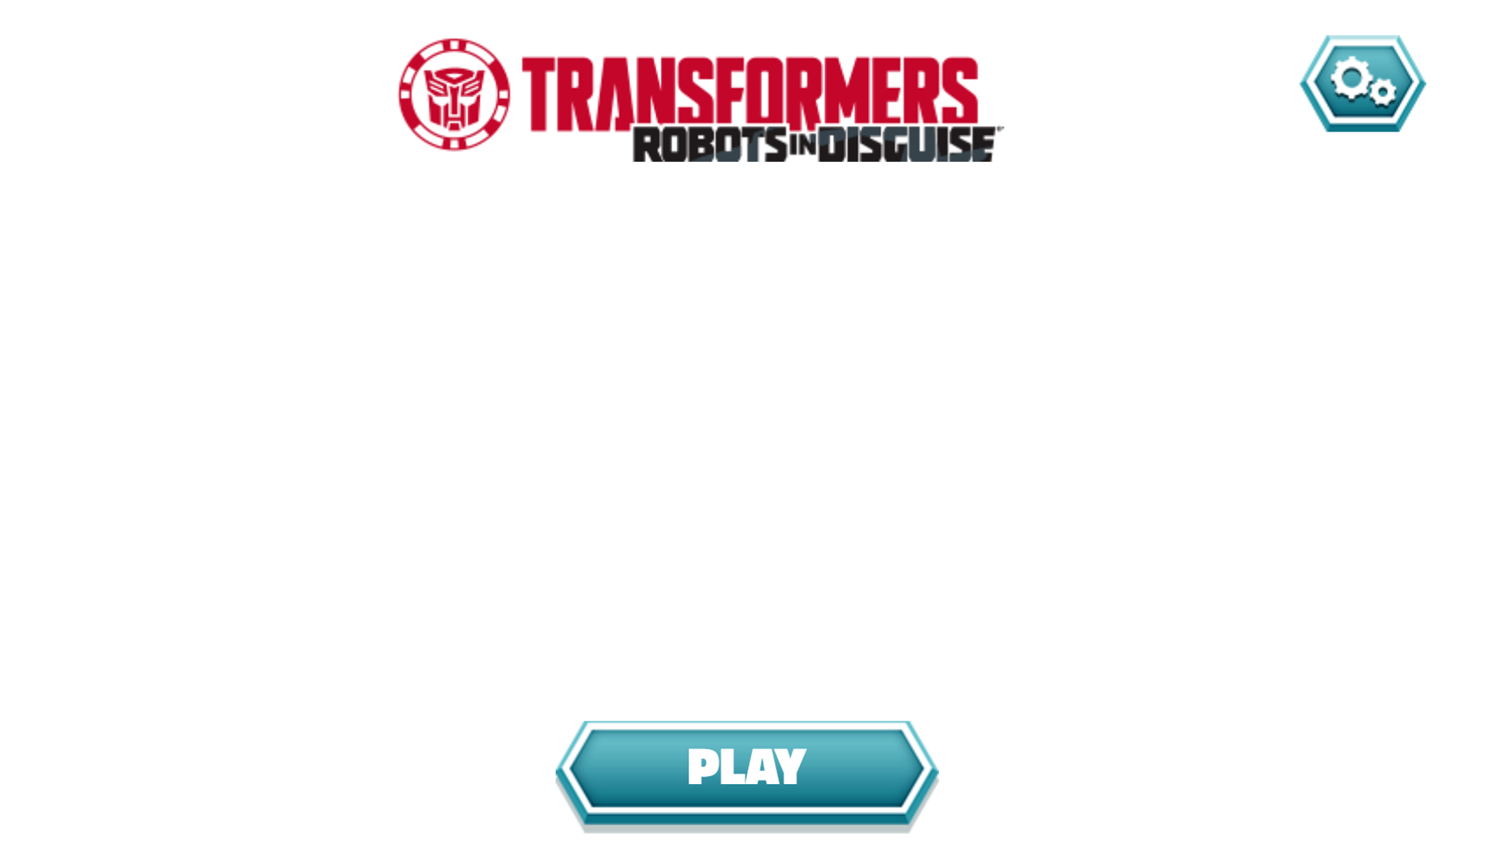 Transformers Faction Face Off Game Welcome Screen Screenshot.